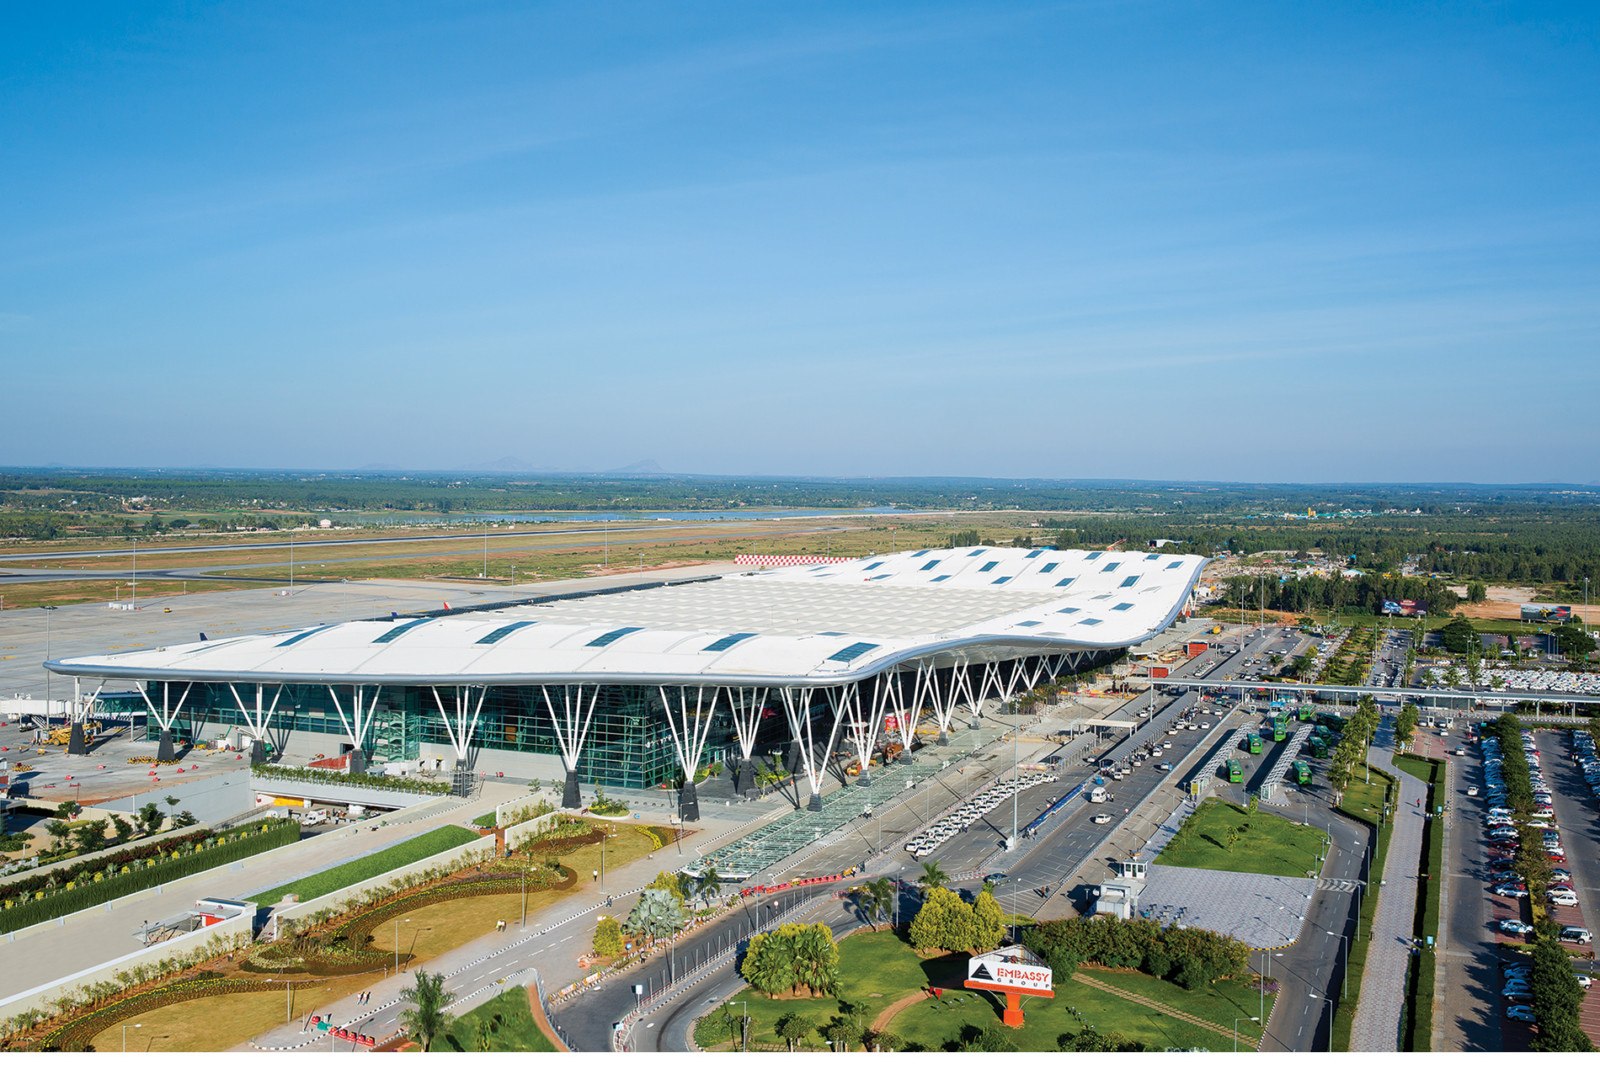 The Best in India: Kempegowda Airport in Bangalore